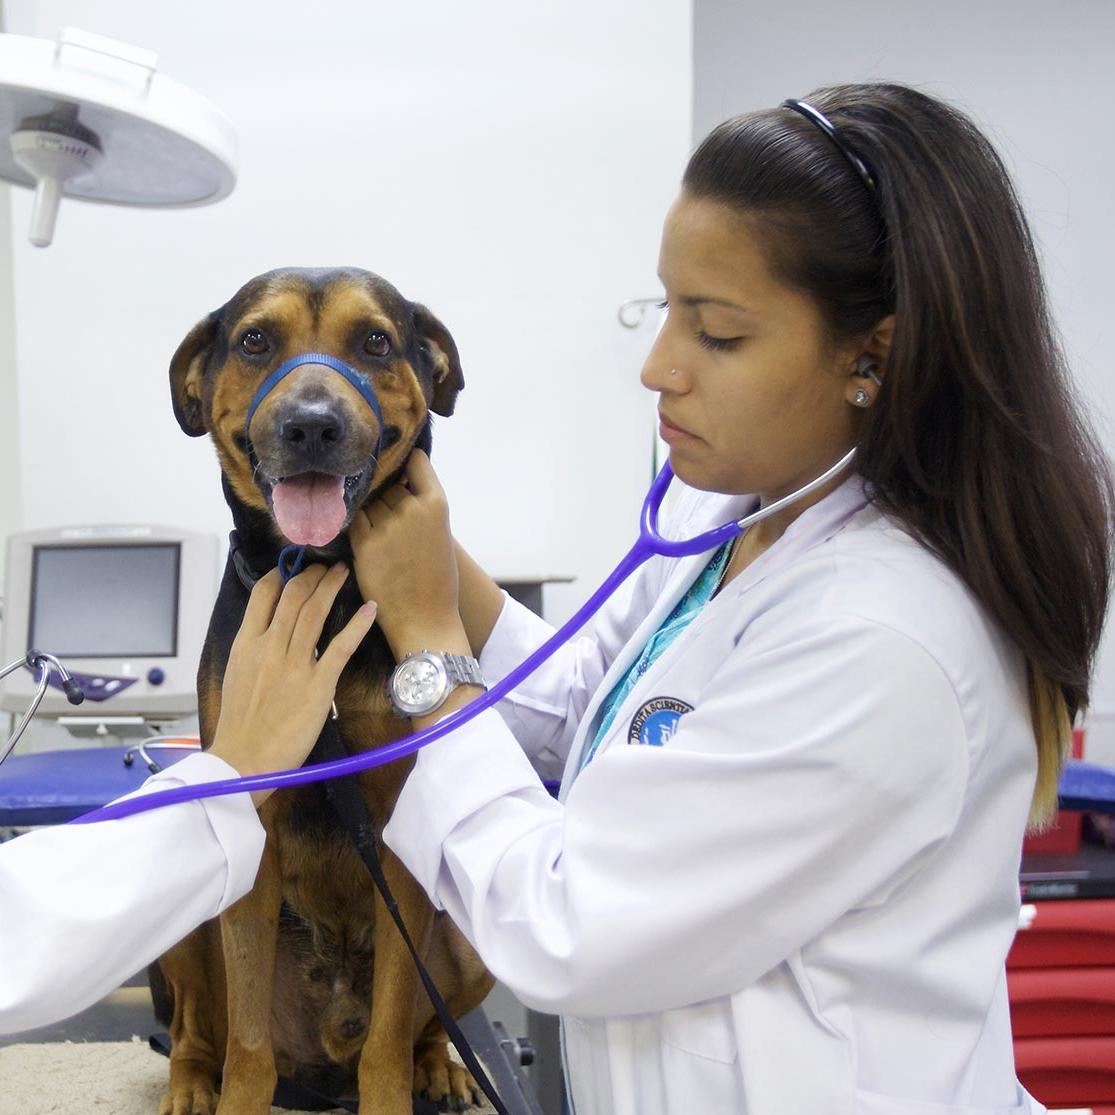 Two female veterinarians examining a large dog